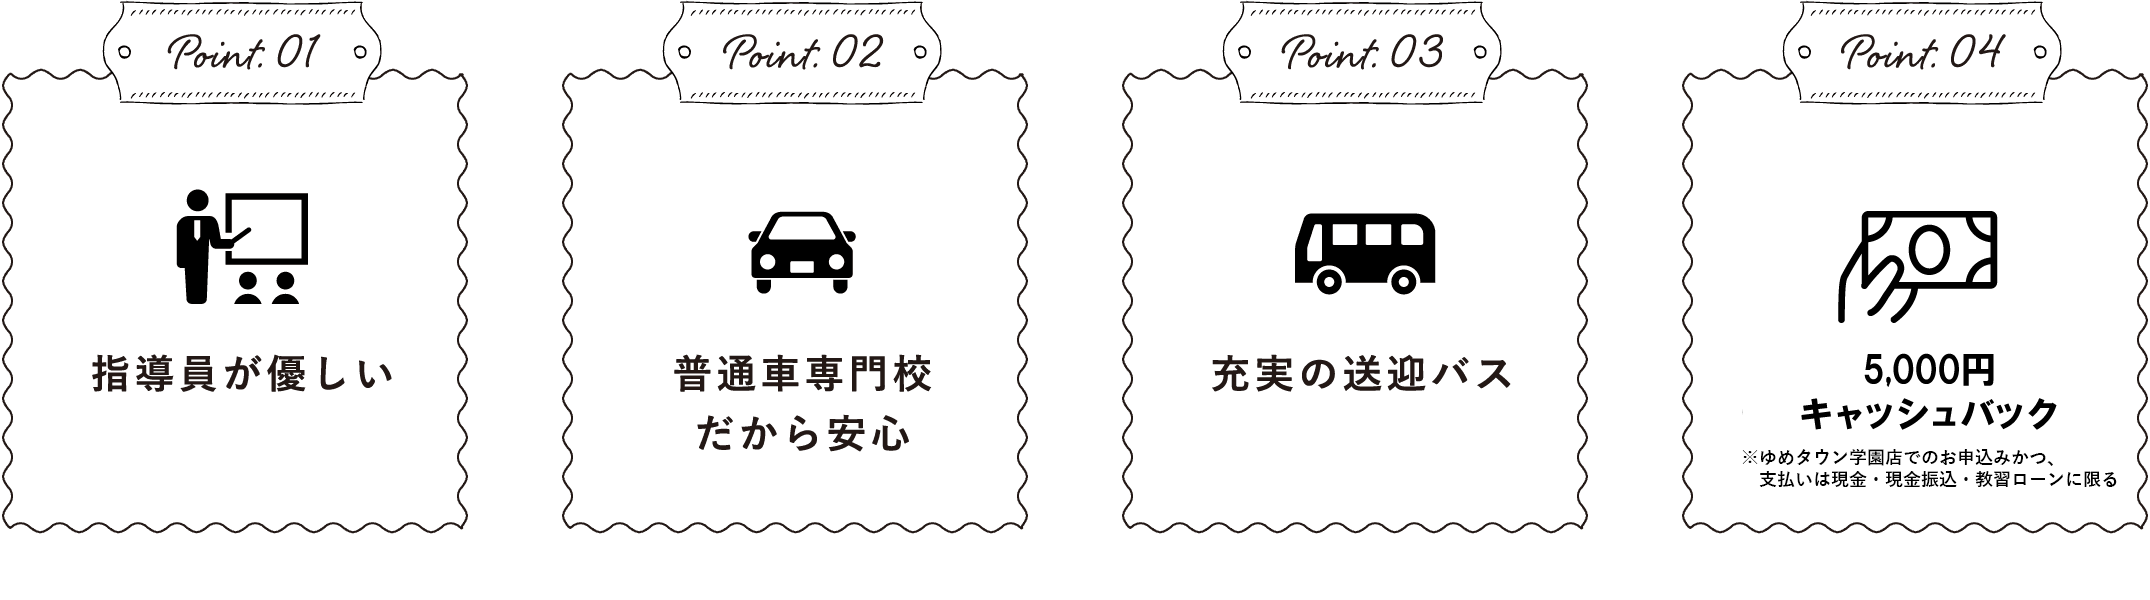 Point.01指導員が優しいPoint.02普通⾞専⾨校だから安⼼Point.03充実の送迎バスPoint.045000円キャッシュバック※